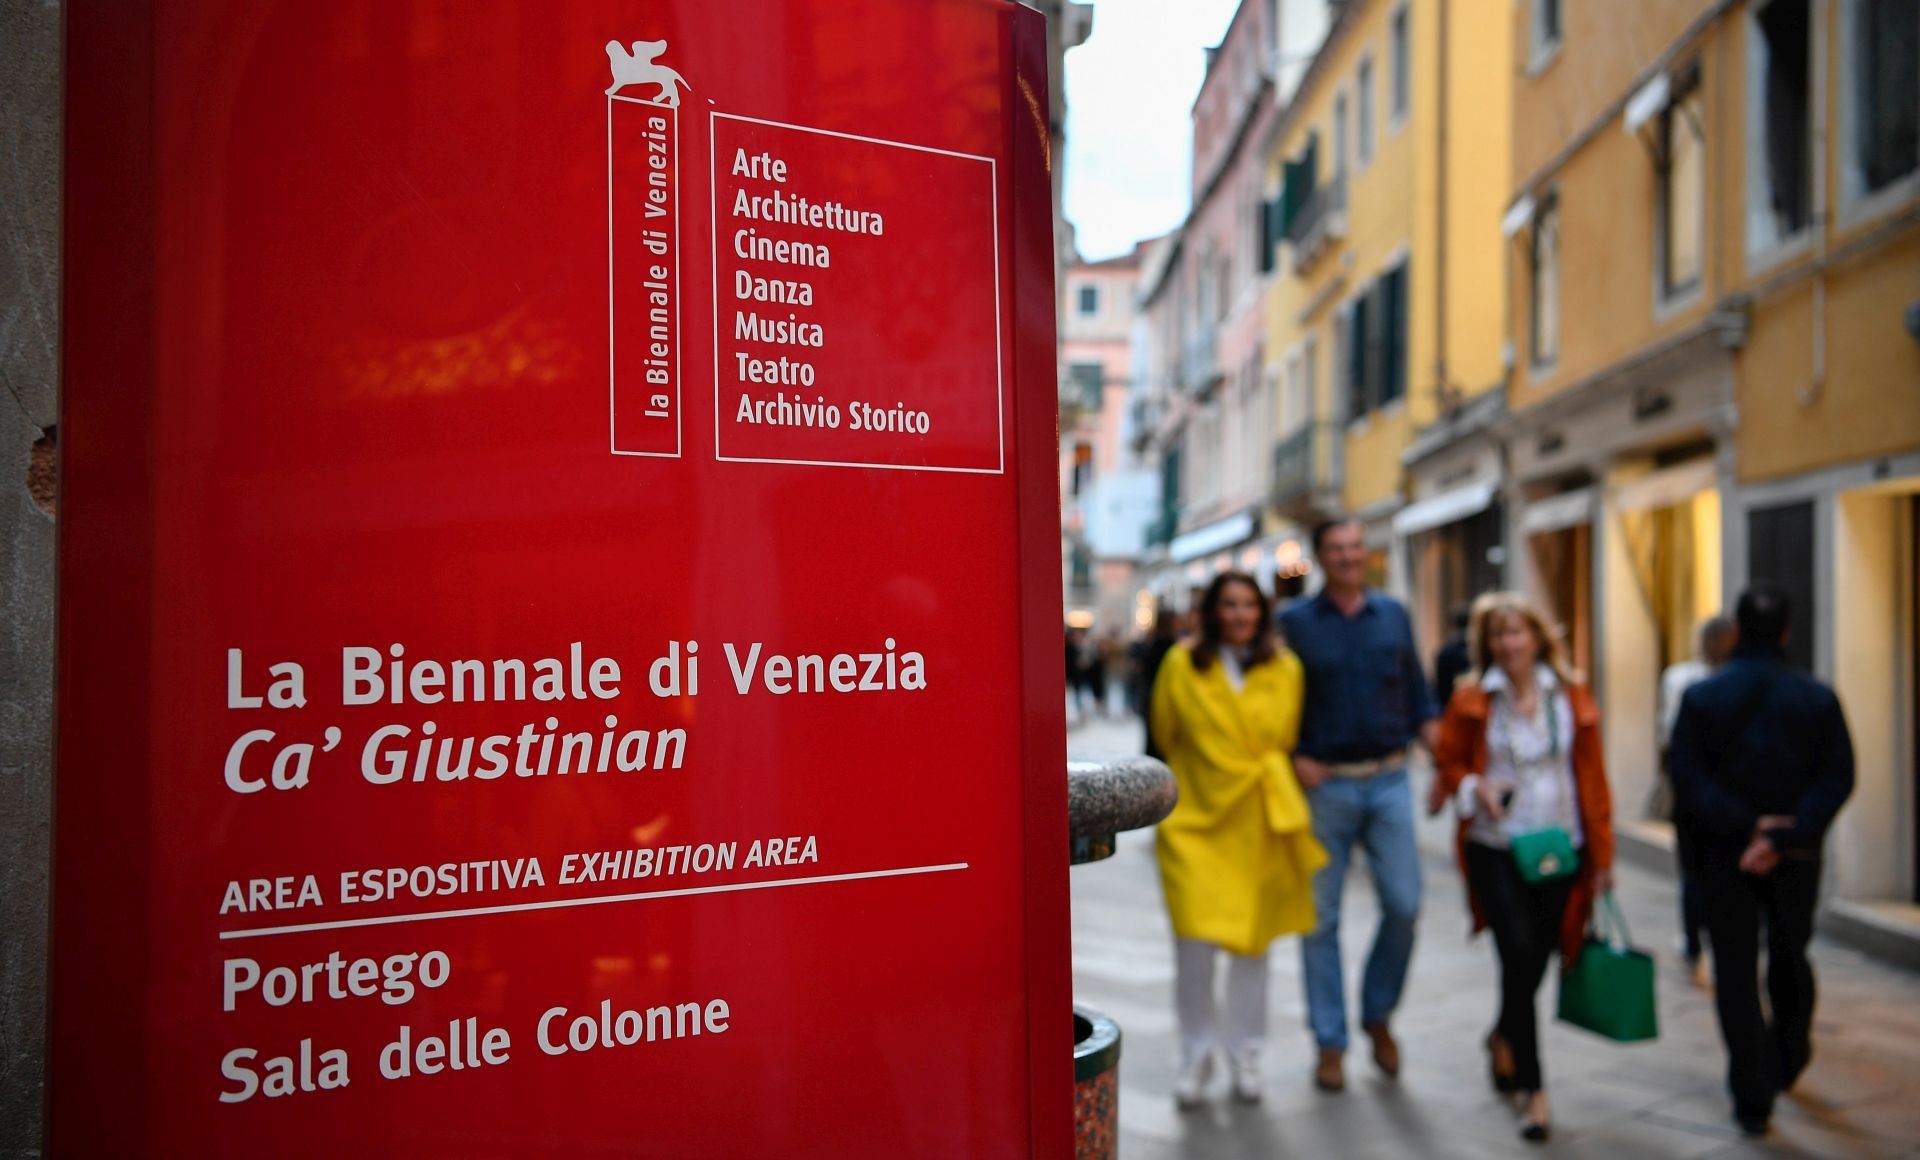 epa05953552 A banner advertises the 57th International Art Exhibition La Biennale di Venezia, in Venice, Italy, 09 May 2017. The Biennale Arte 2017 runs from 13 May to 26 November.  EPA/ANDREA MEROLA HUNGARY OUT